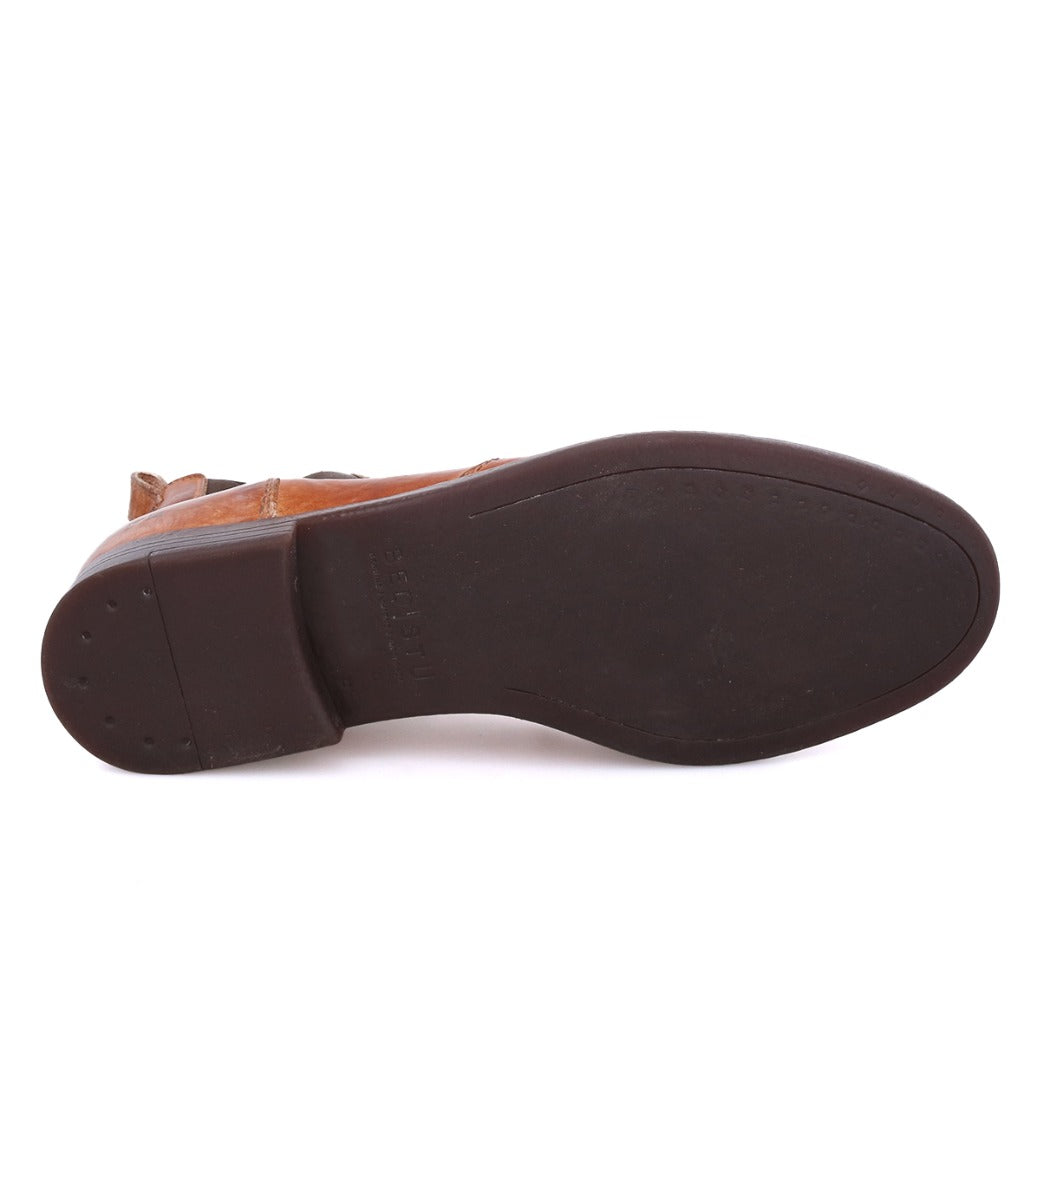 A pair of Vasari brown shoes with black soles on a white background by Bed Stu.